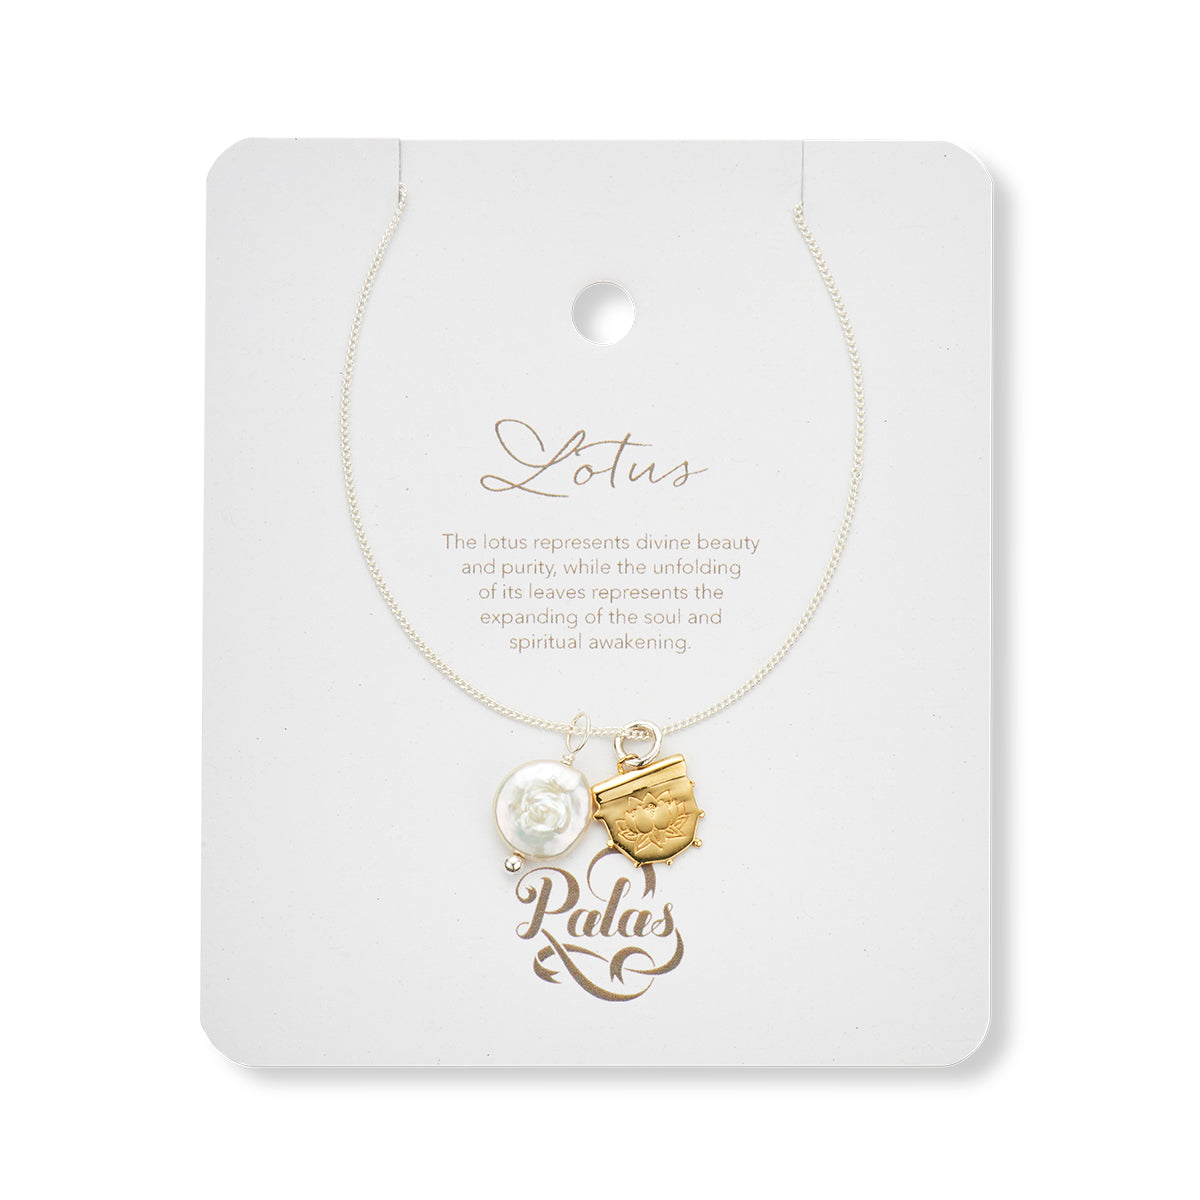 Lotus and pearl amulet necklace